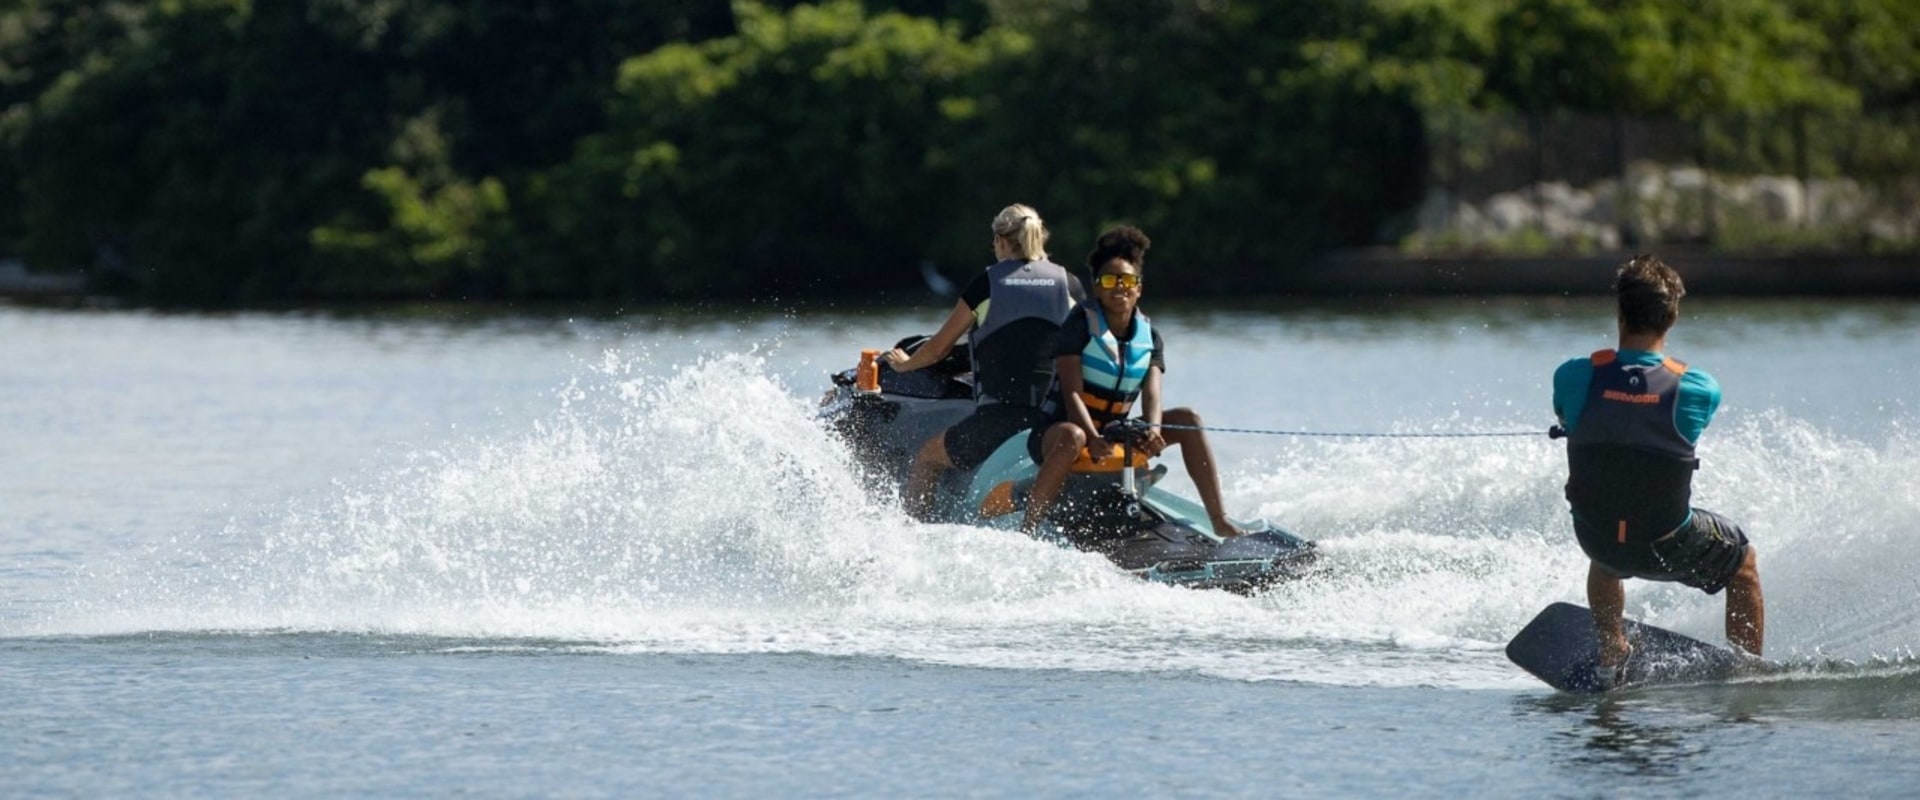 What size jet ski will pull a skier?